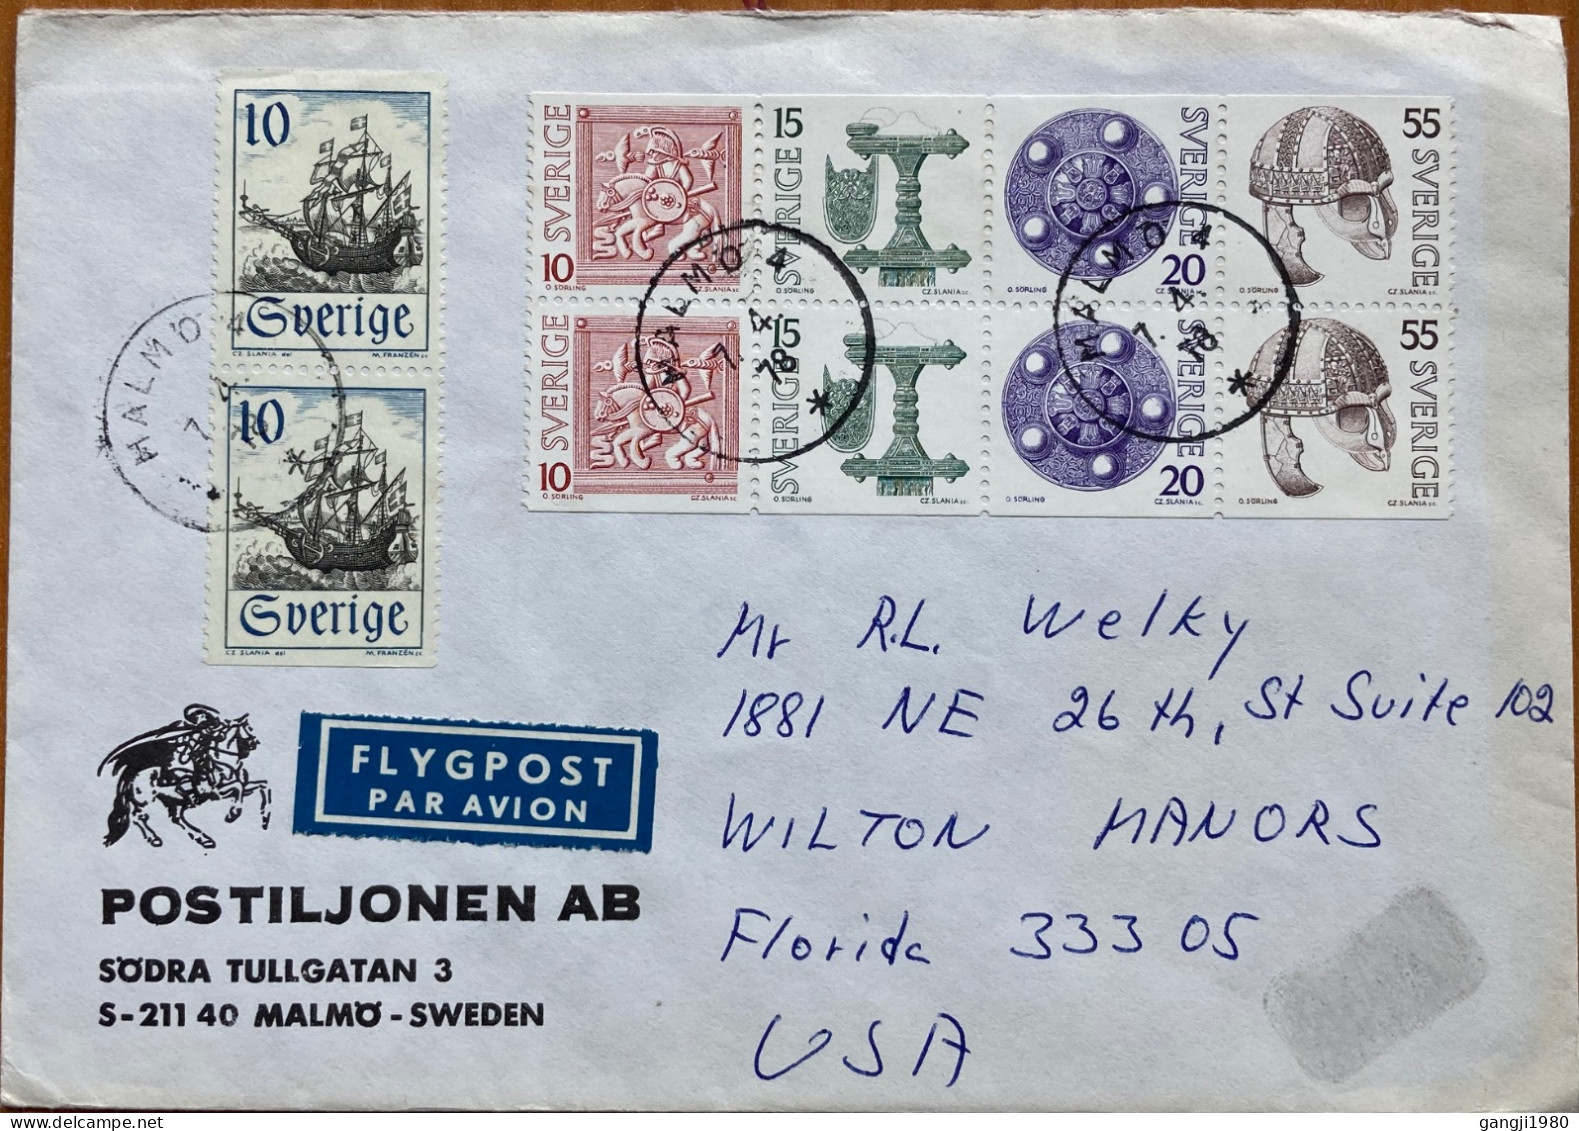 SWEDEN 1978, ILLUSTRATE COVER, USED TO USA, ARCHAEOLOGICAL DISCOVERY, BOOKLET PANE, MULTI 10 STAMP, HELMET, SHIELD, SHIP - Briefe U. Dokumente